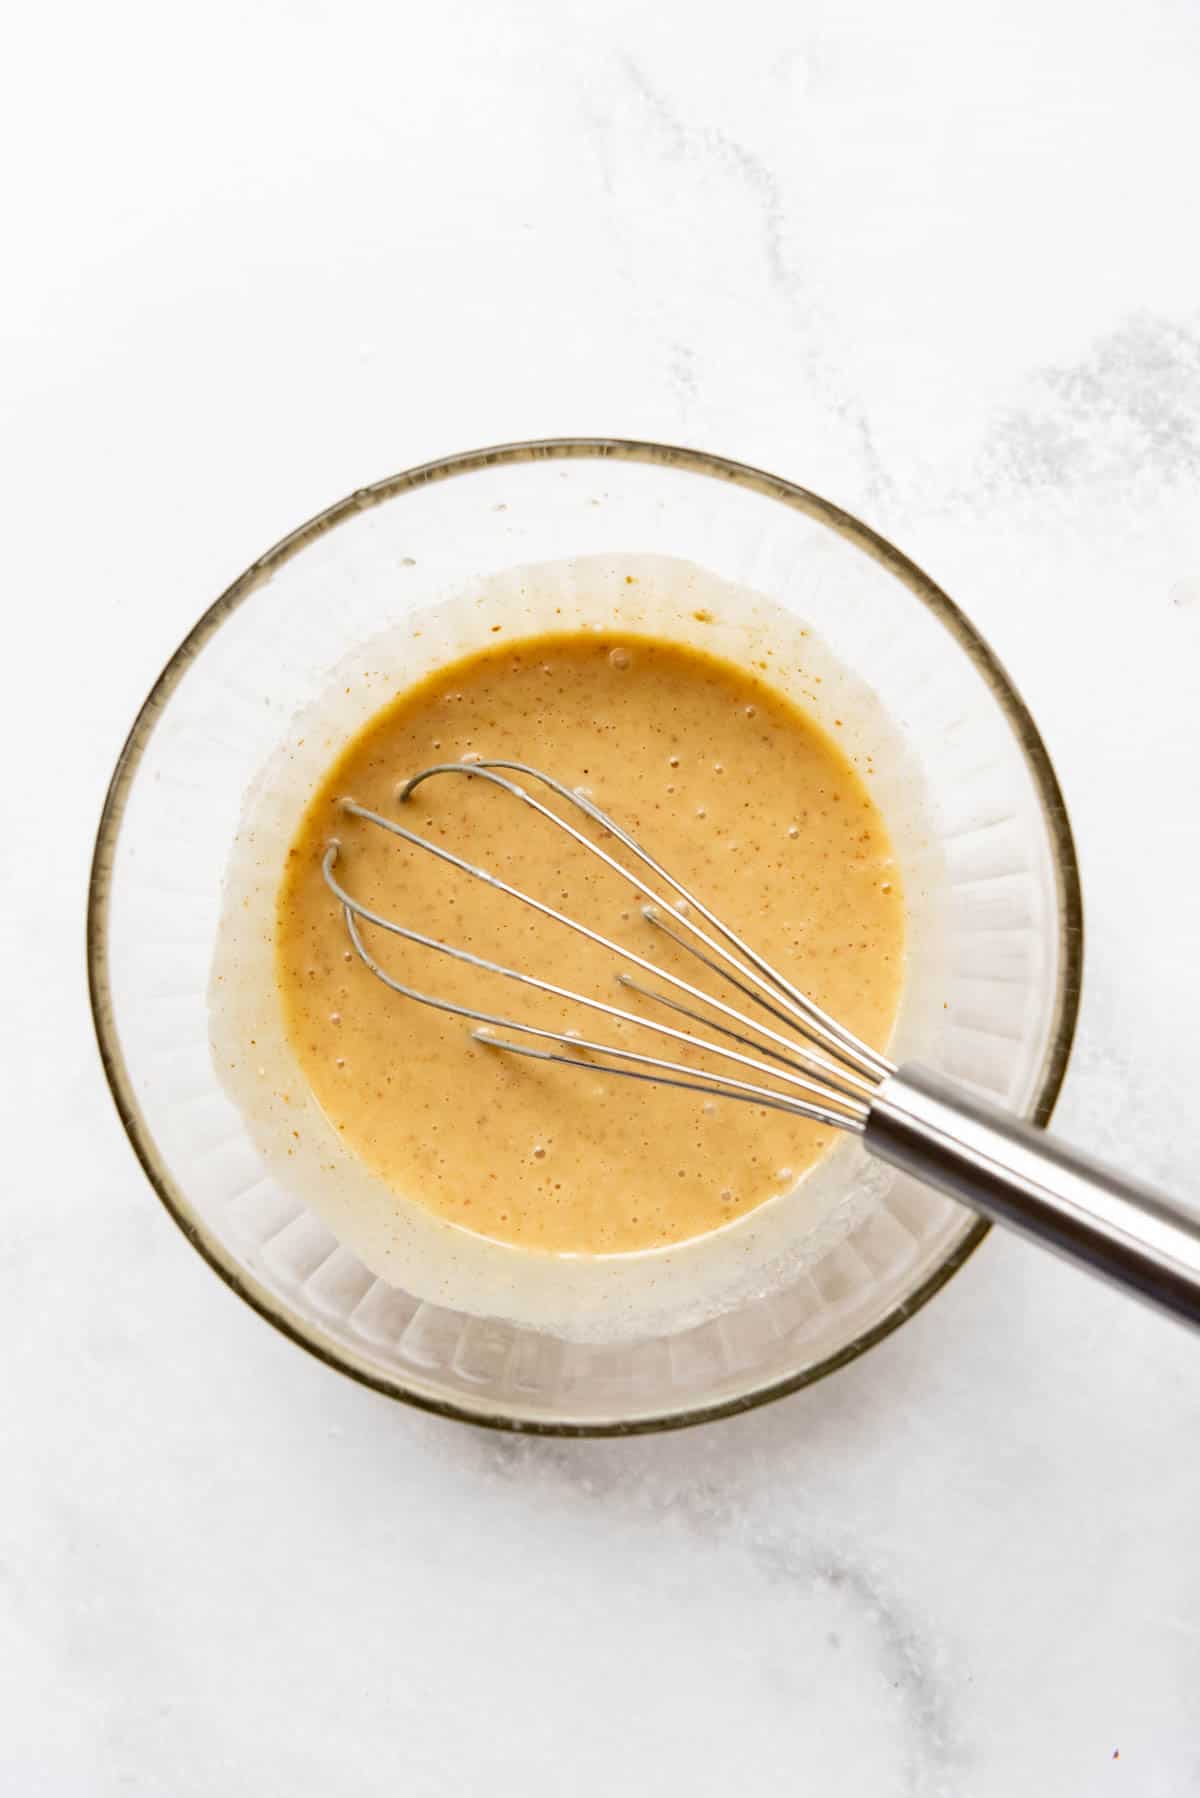 Honey mustard marinade in a glass bowl with a whisk.